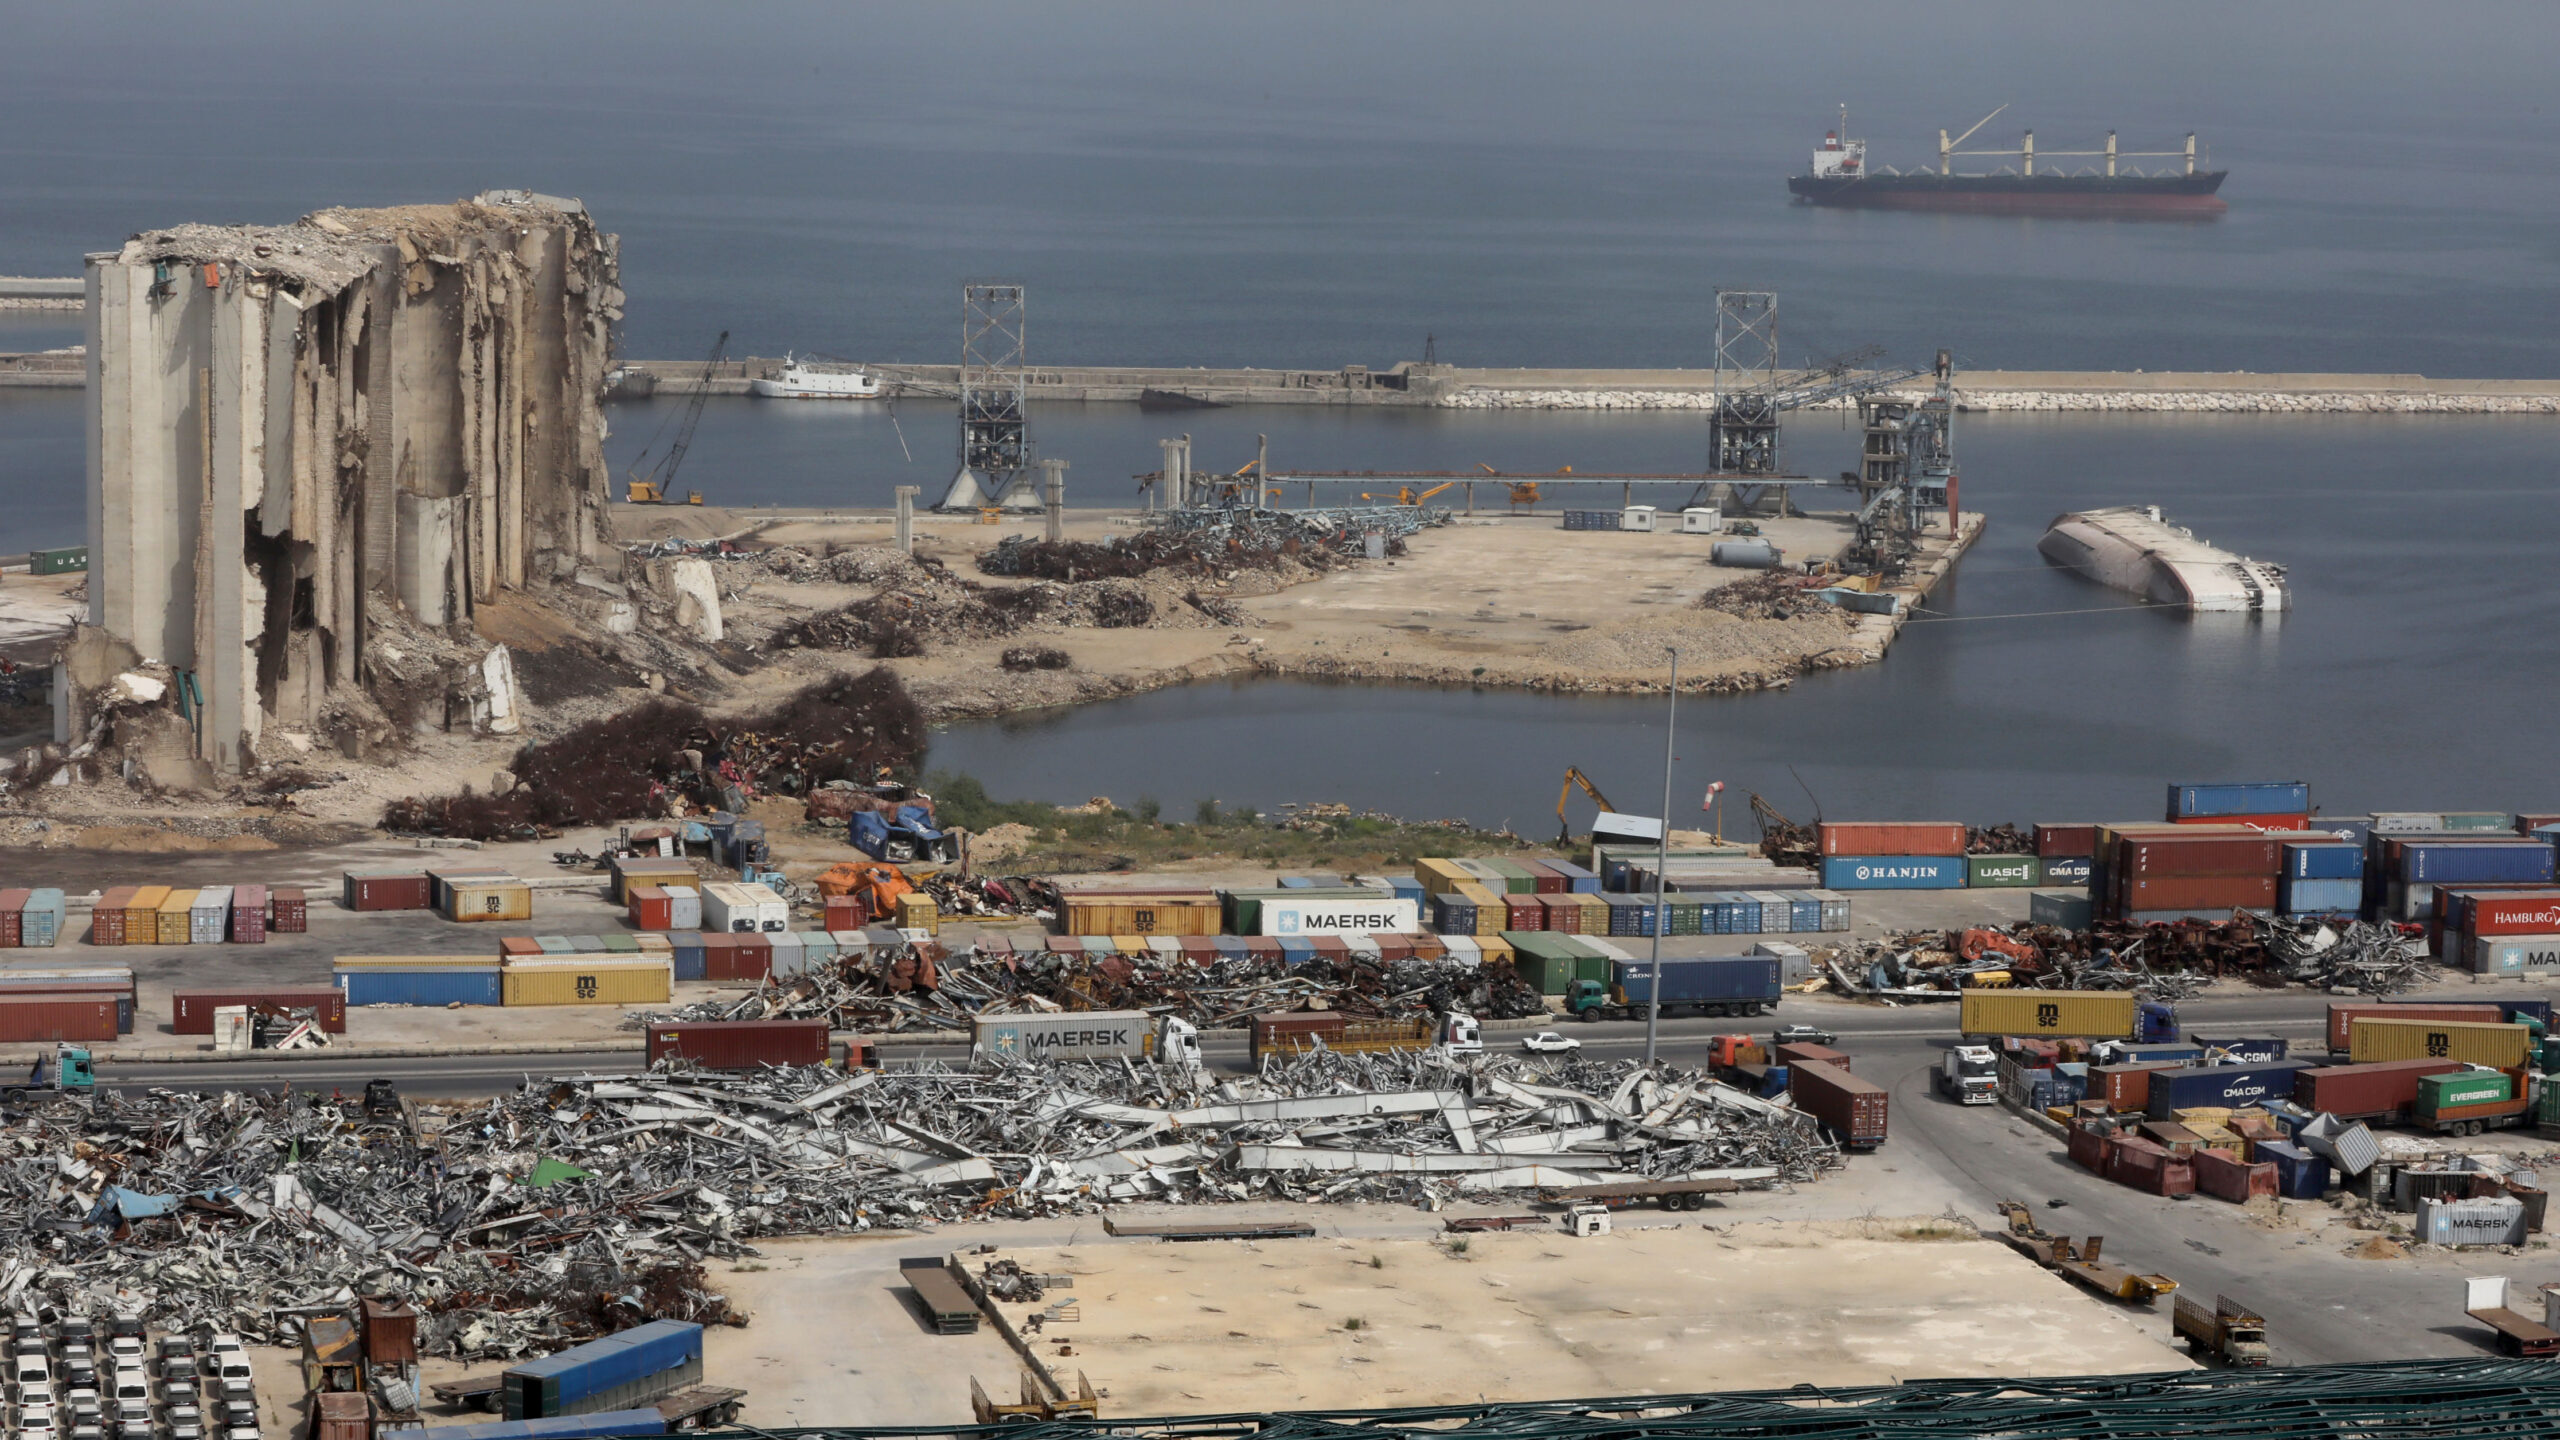 More than 2 years after port explosion, Lebanon's navy focuses on